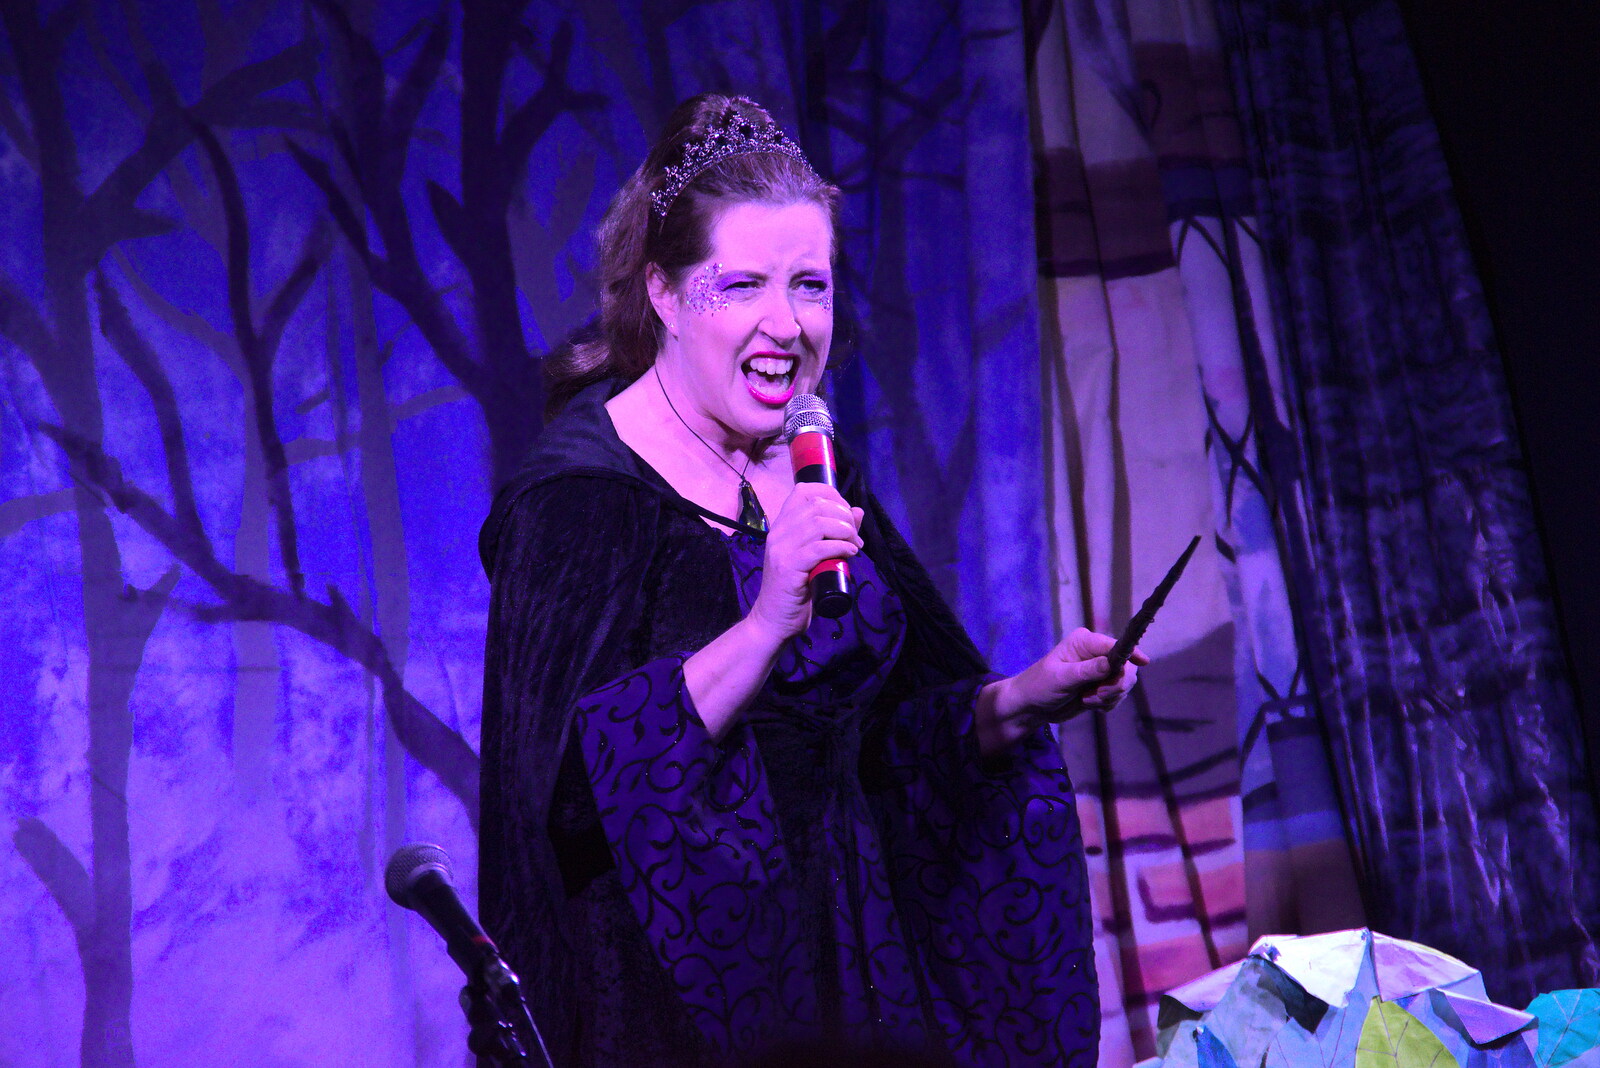 Suzanne sings an evil song from Dove Players' Trouble in Pantoland, Eye Community Centre, Suffolk - 11th December 2021